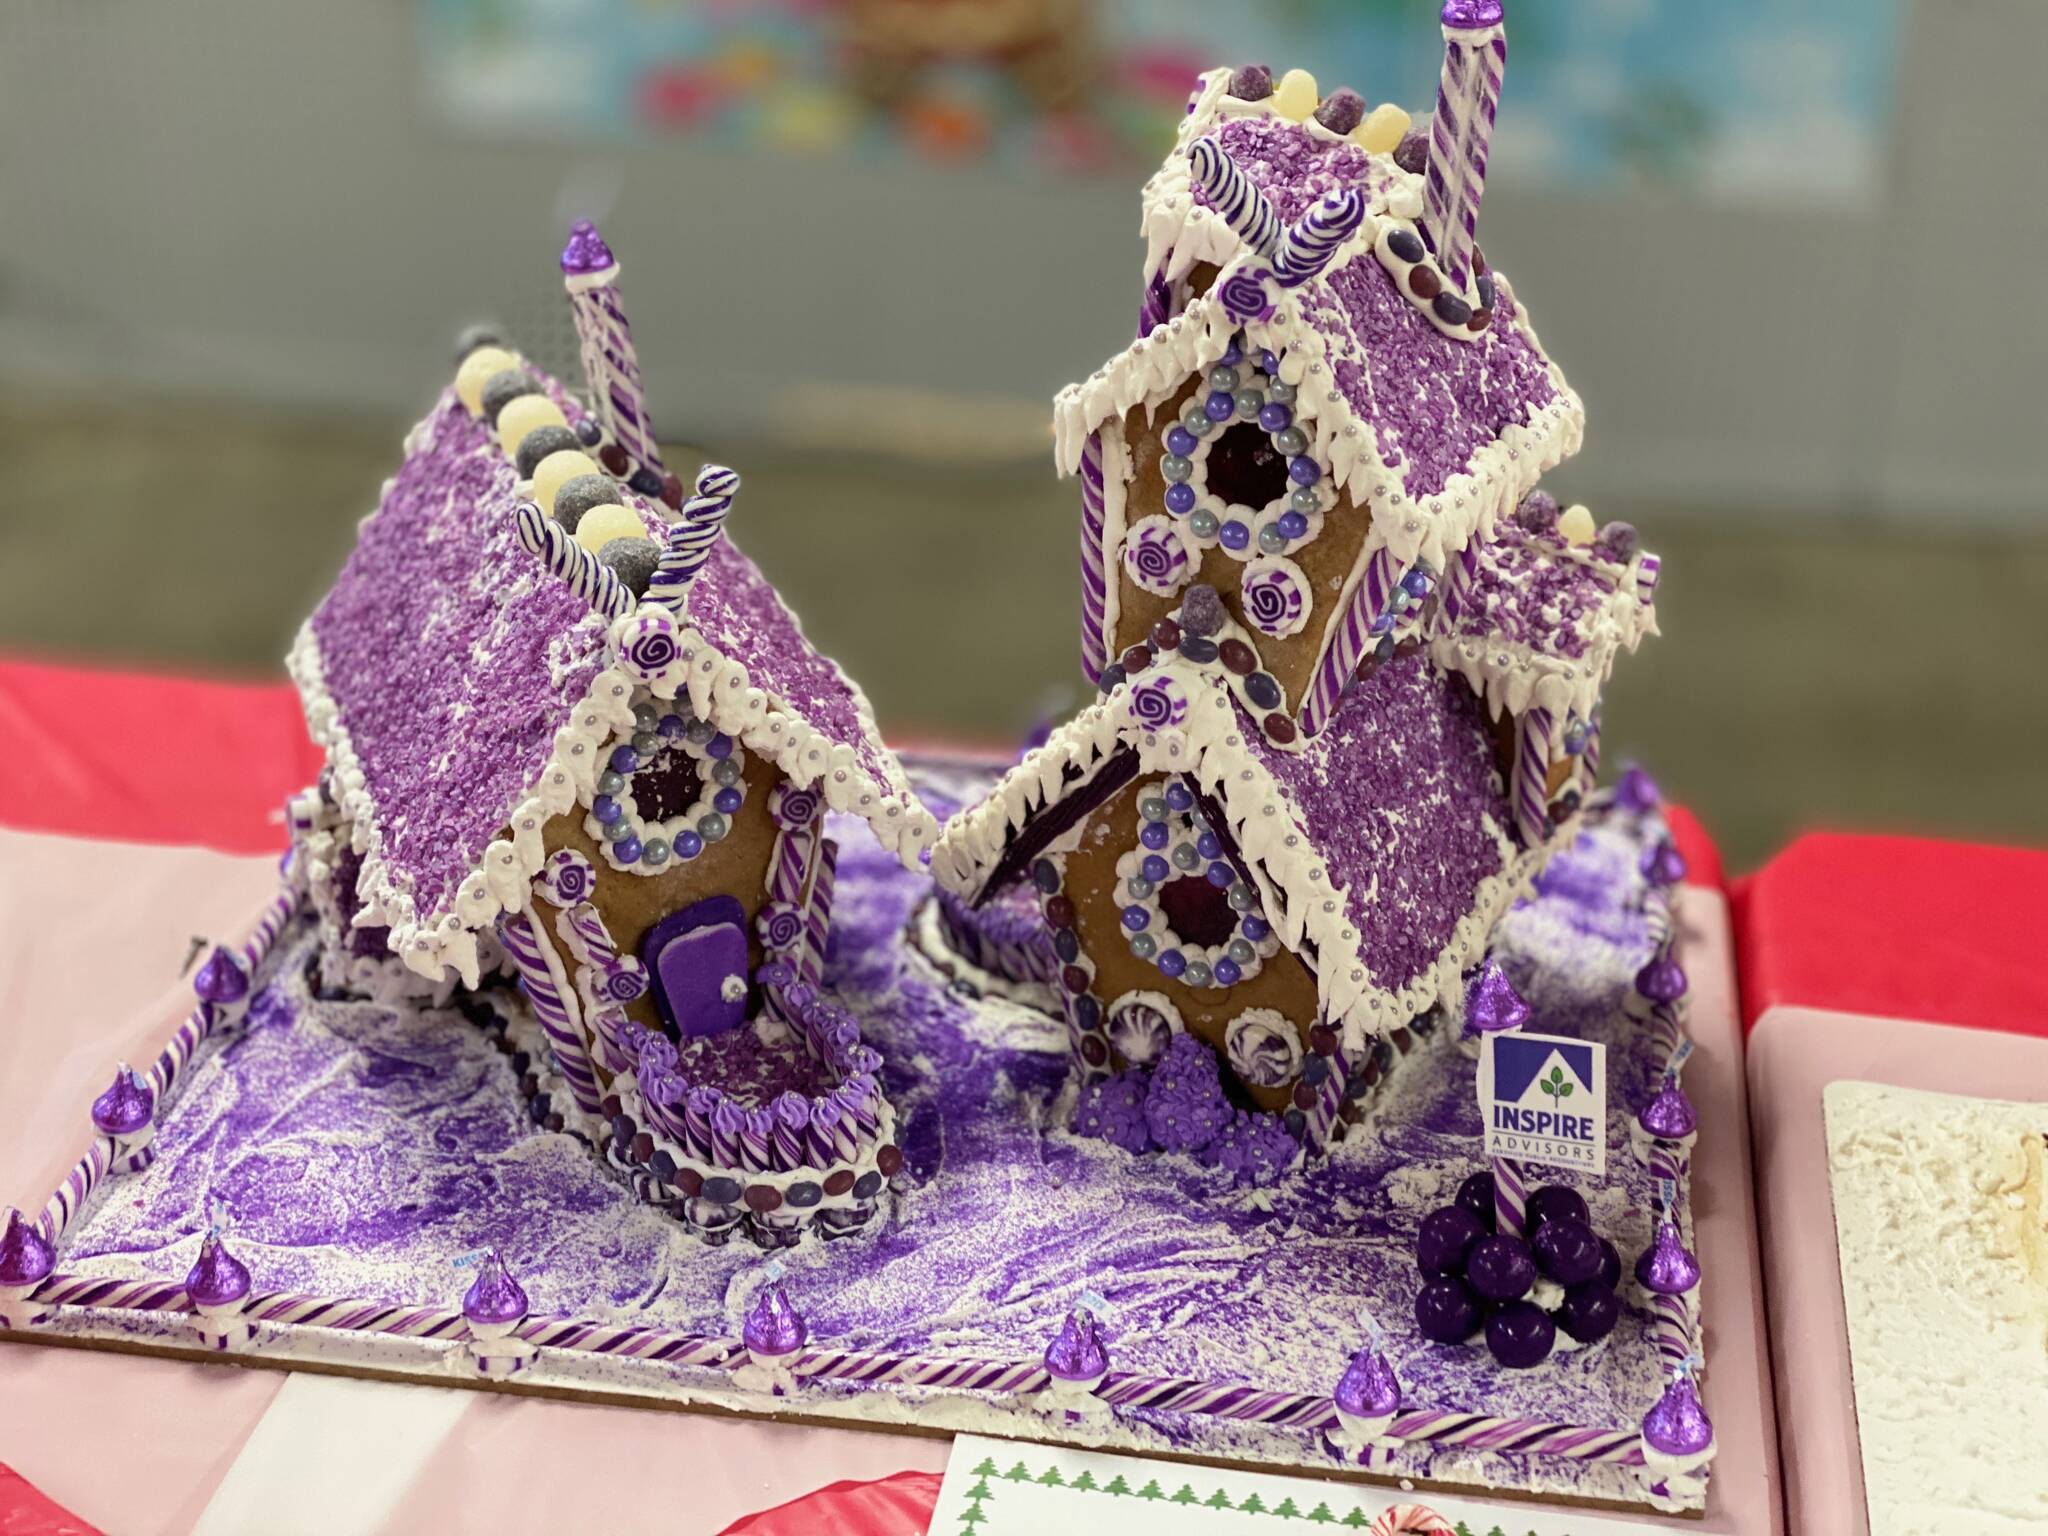 Photo by Rick Moyer
Local businesses displayed their gingerbread houses starting Friday, Dec. 3, 2021, before they’re moved to Wiitamaki’s for judging.